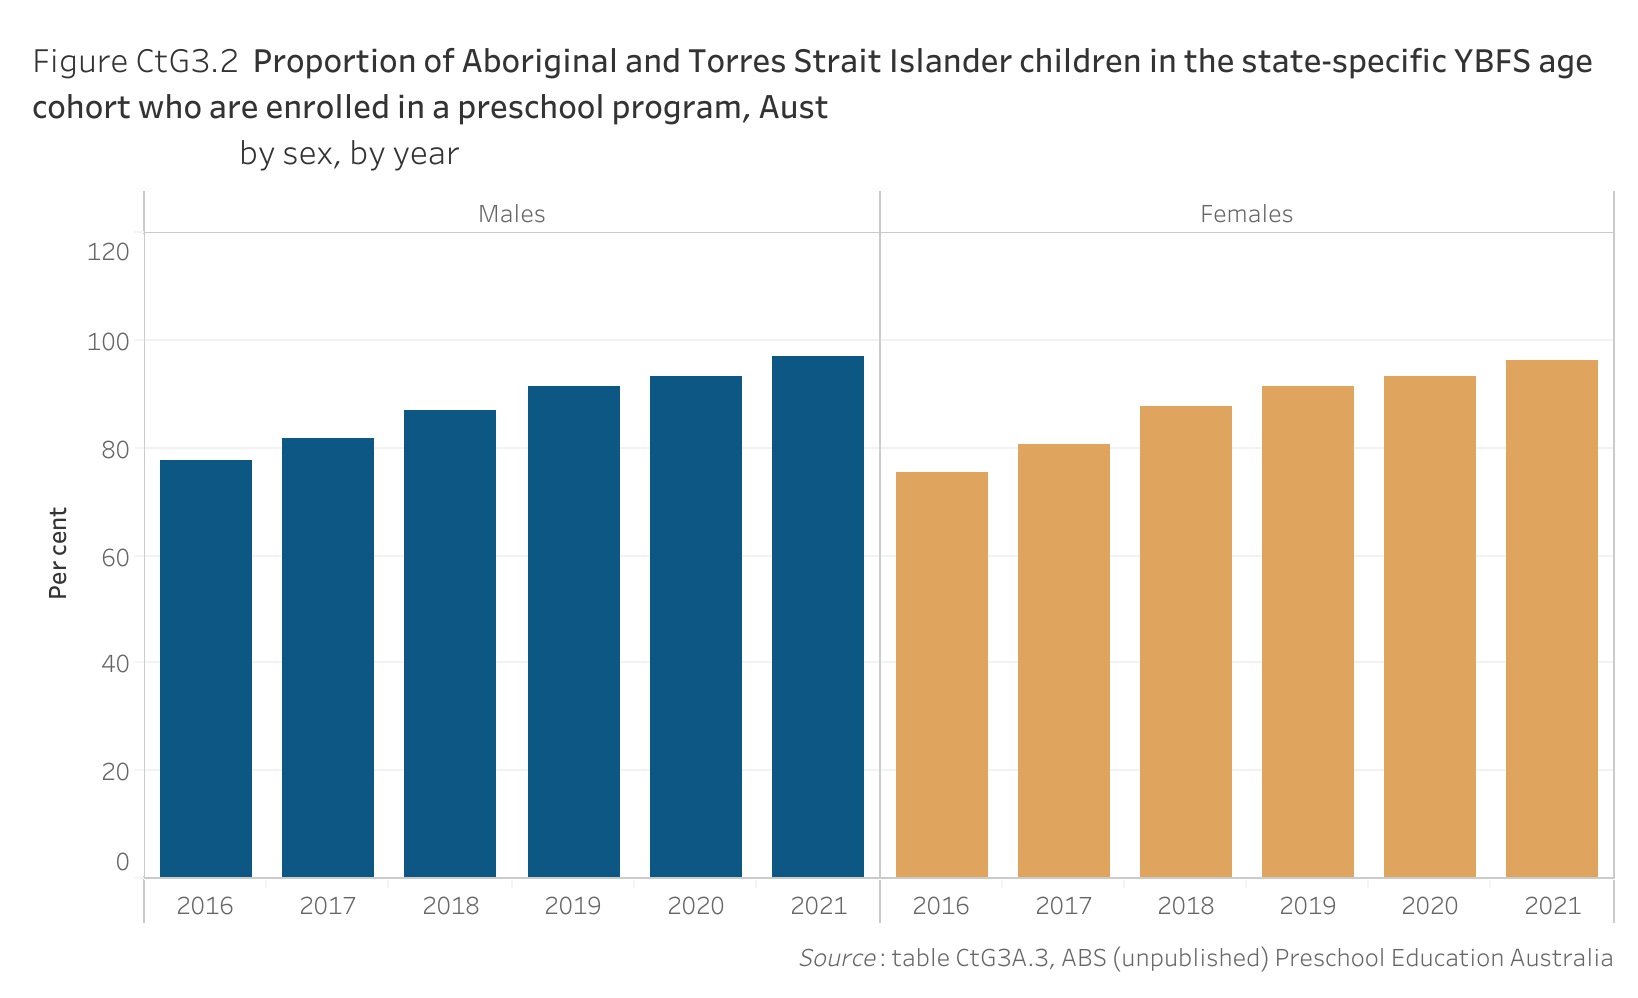 Figure CtG3.2. Bar chart showing the proportion of Aboriginal and Torres Strait Islander children in the state-specific Year Before Full-time Schooling (YBFS) age cohort who are enrolled in a preschool program in Australia, by sex and by year. Data table of figure CtG3.2 is below.